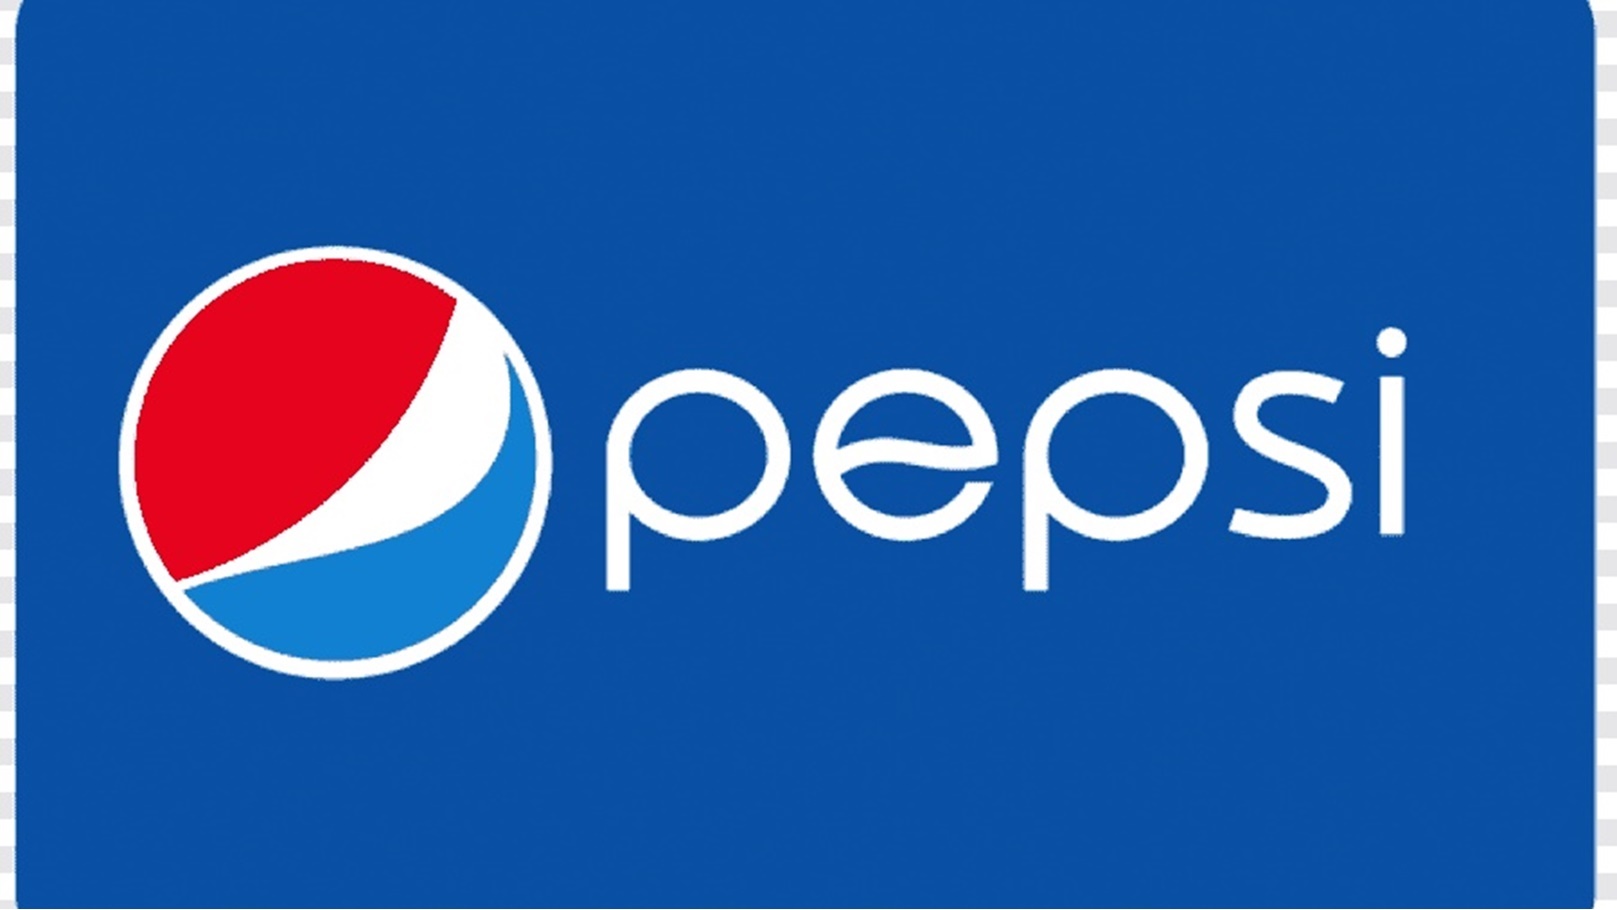 png-clipart-pepsi-logo-brand-font-product-pepsi-blue-text